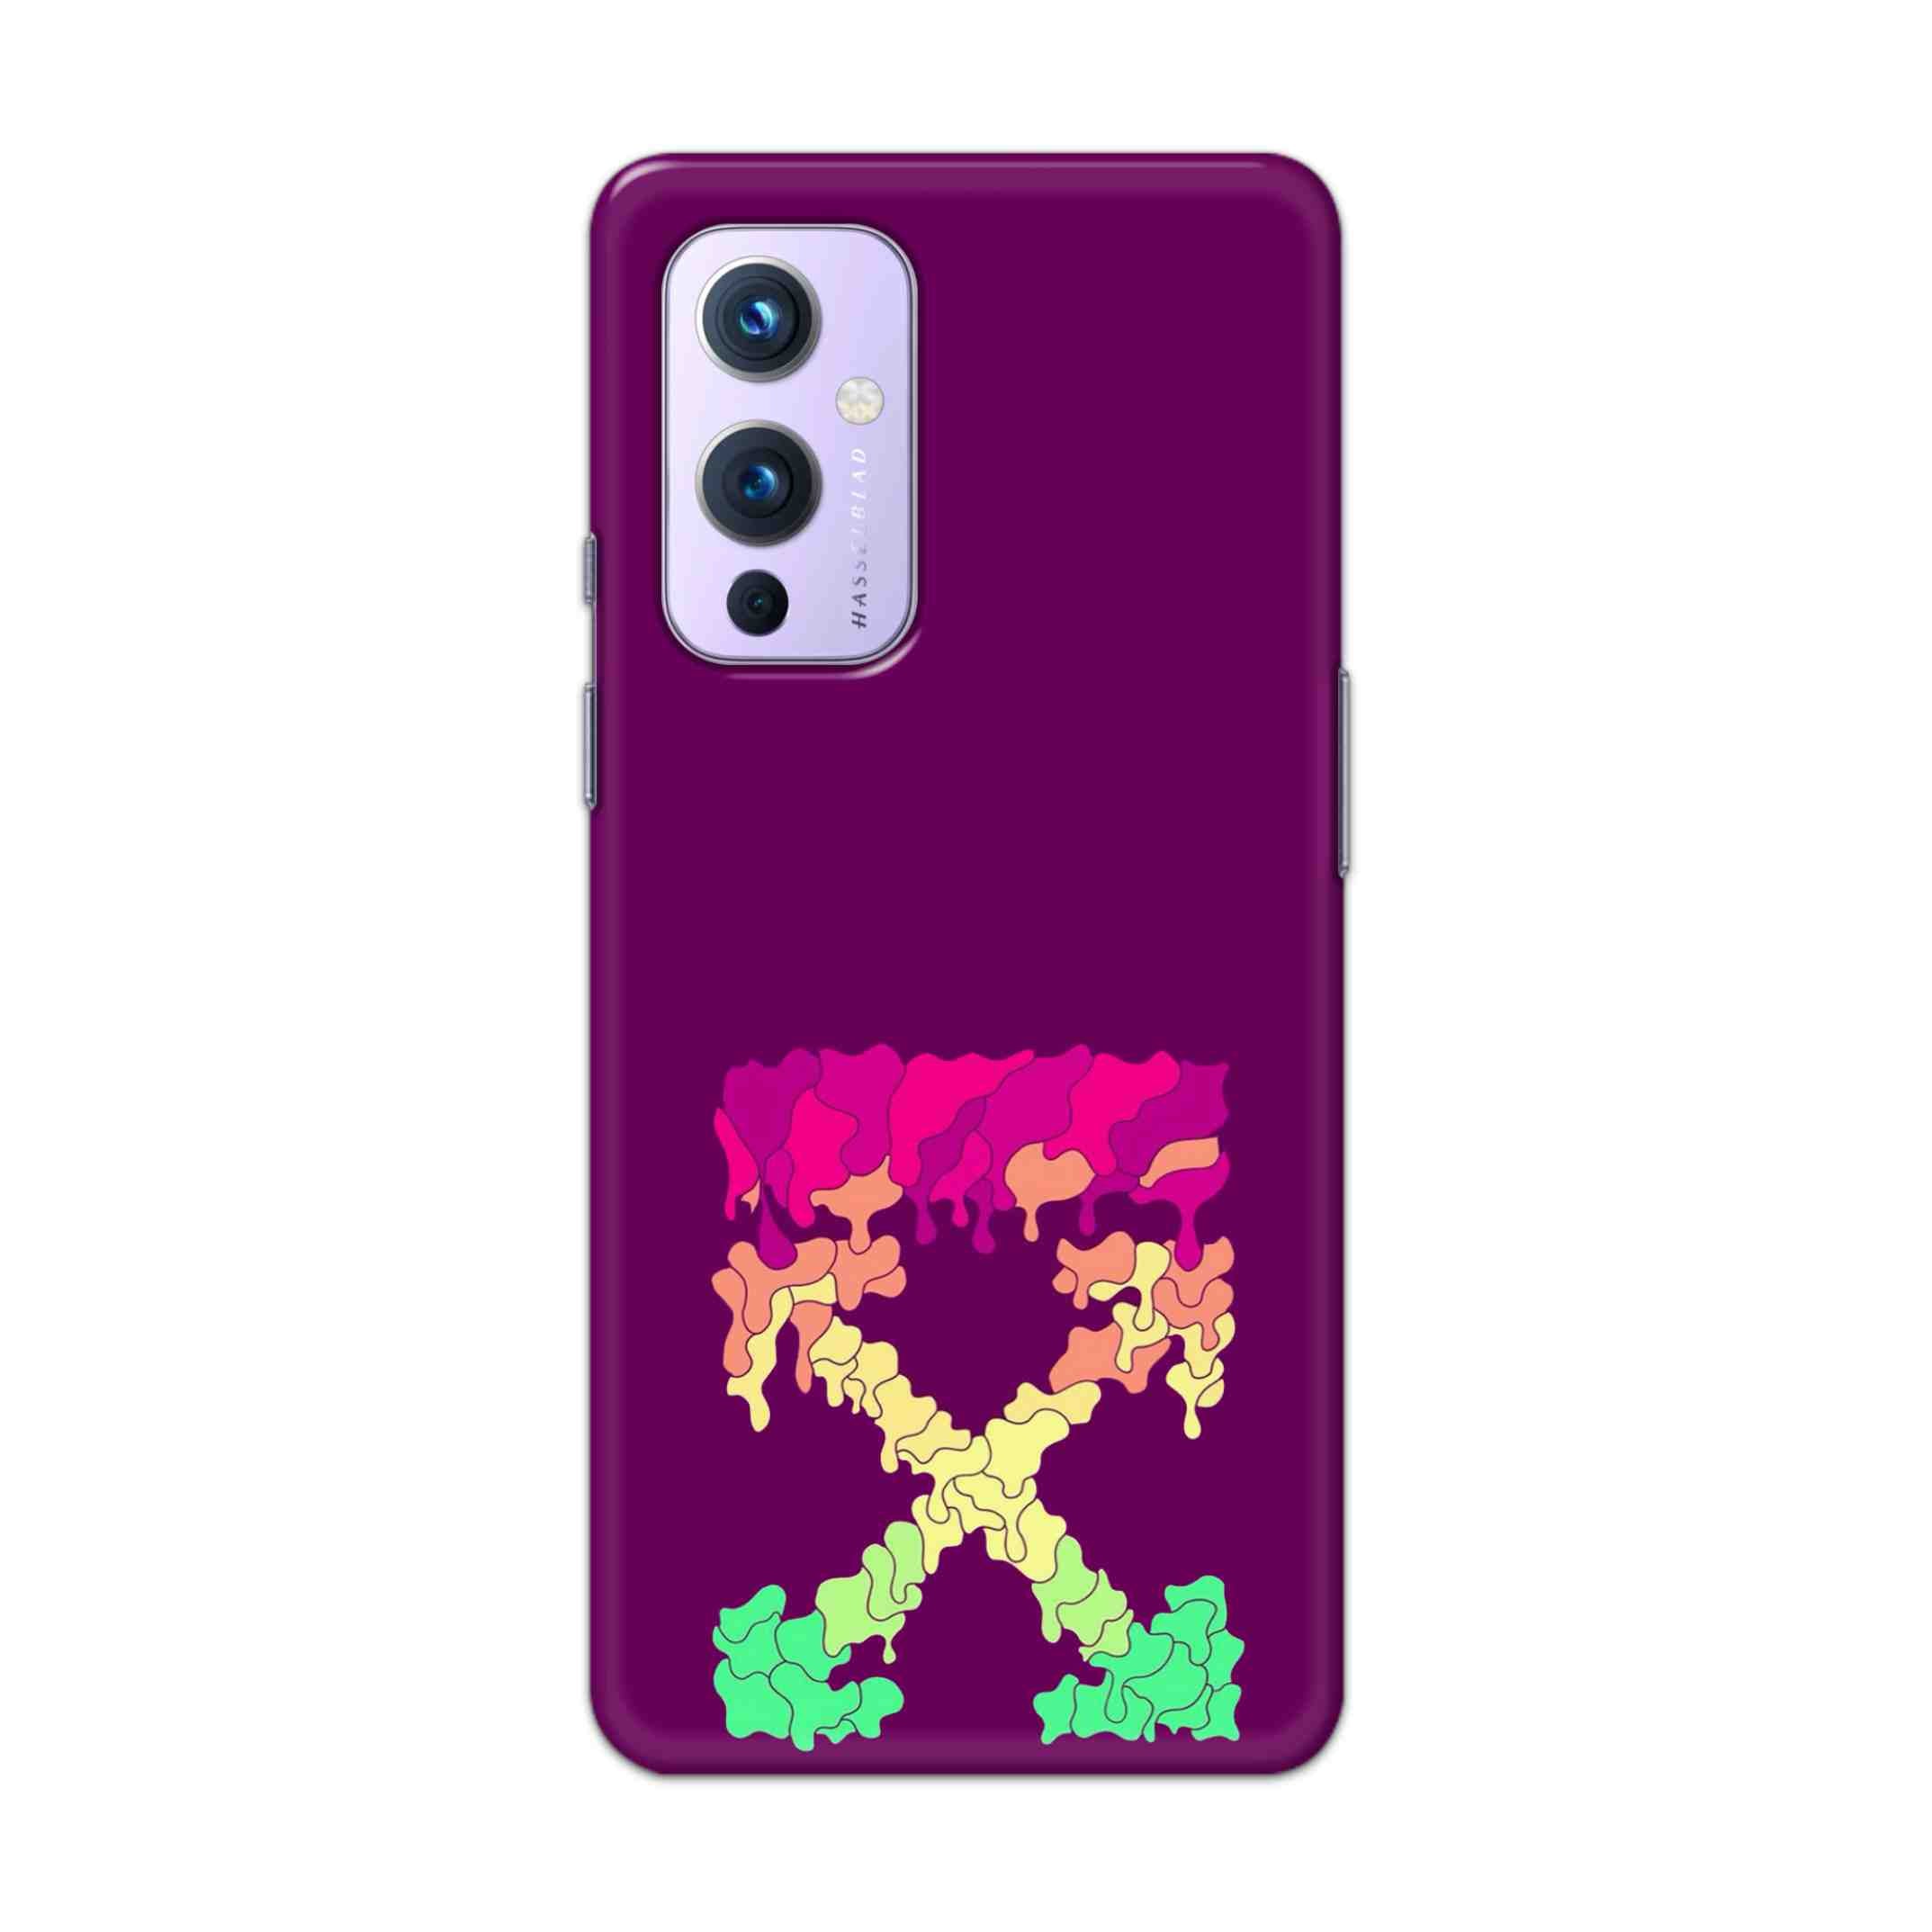 Buy X.O Hard Back Mobile Phone Case Cover For OnePlus 9 Online